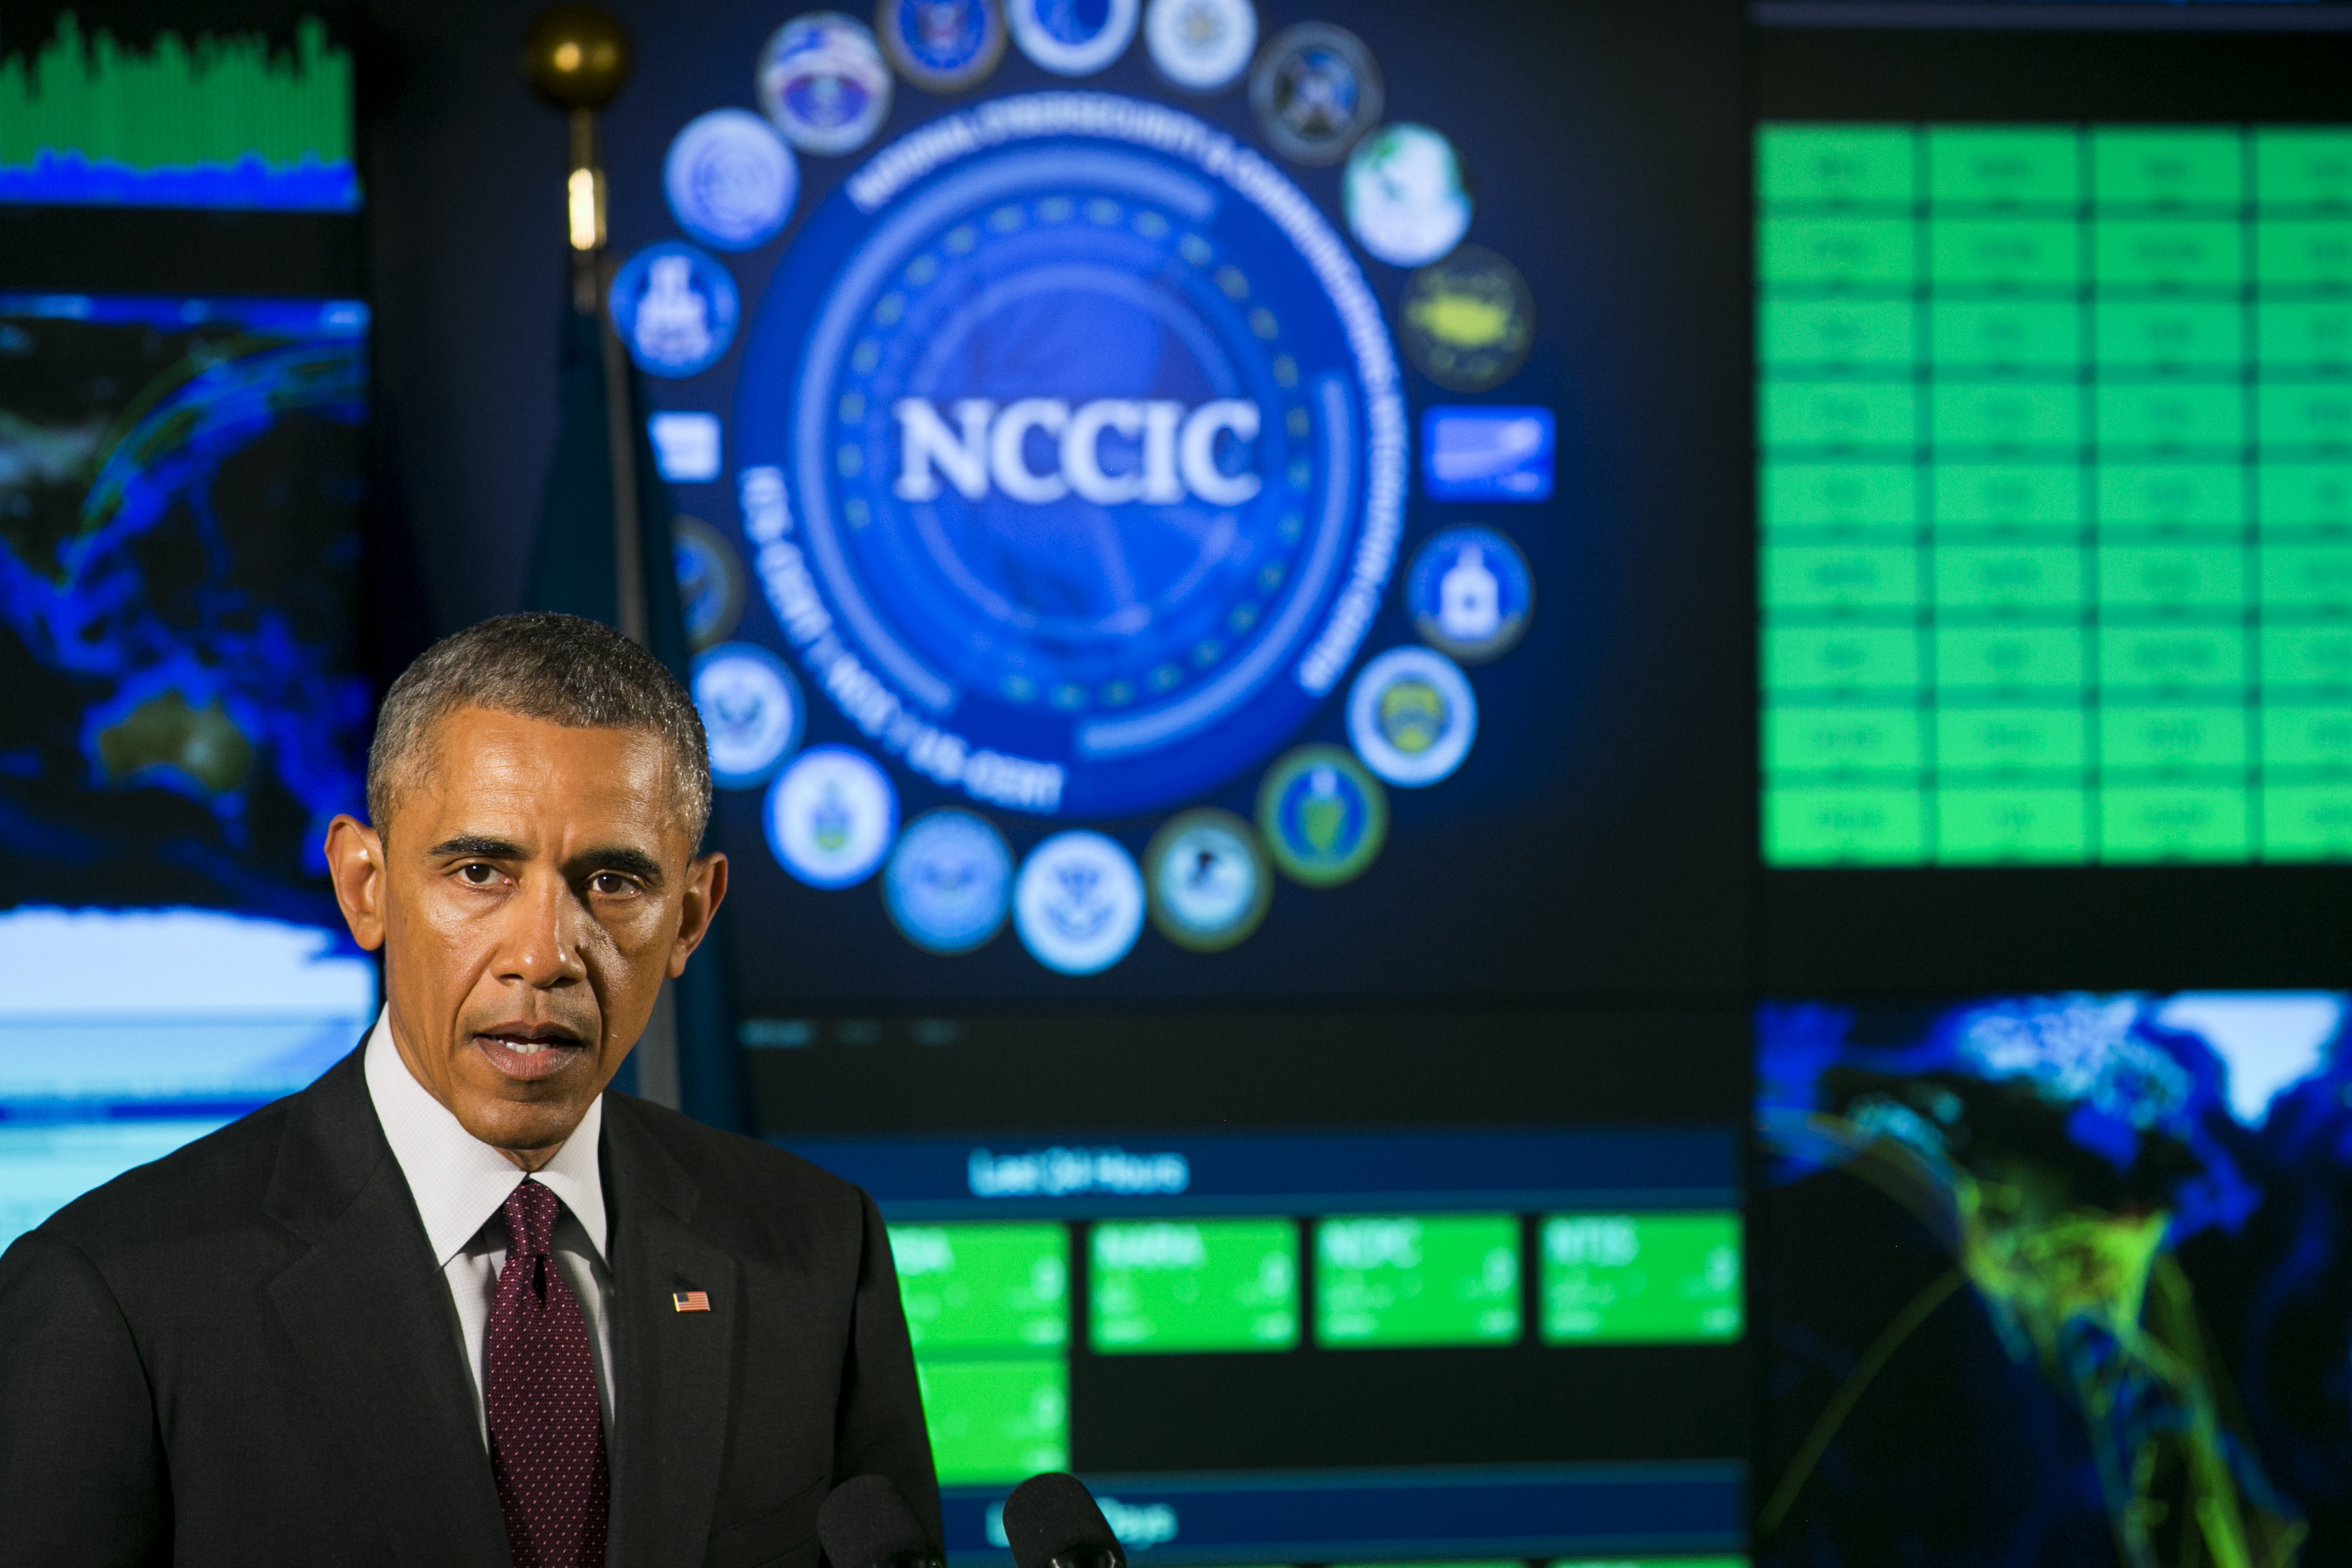 U.S. President Barack Obama delivers remarks at the National Cybersecurity and Communications Integration Center (NCCIC) on January 13, 2015 in Arlington, Virginia. (Getty Images)